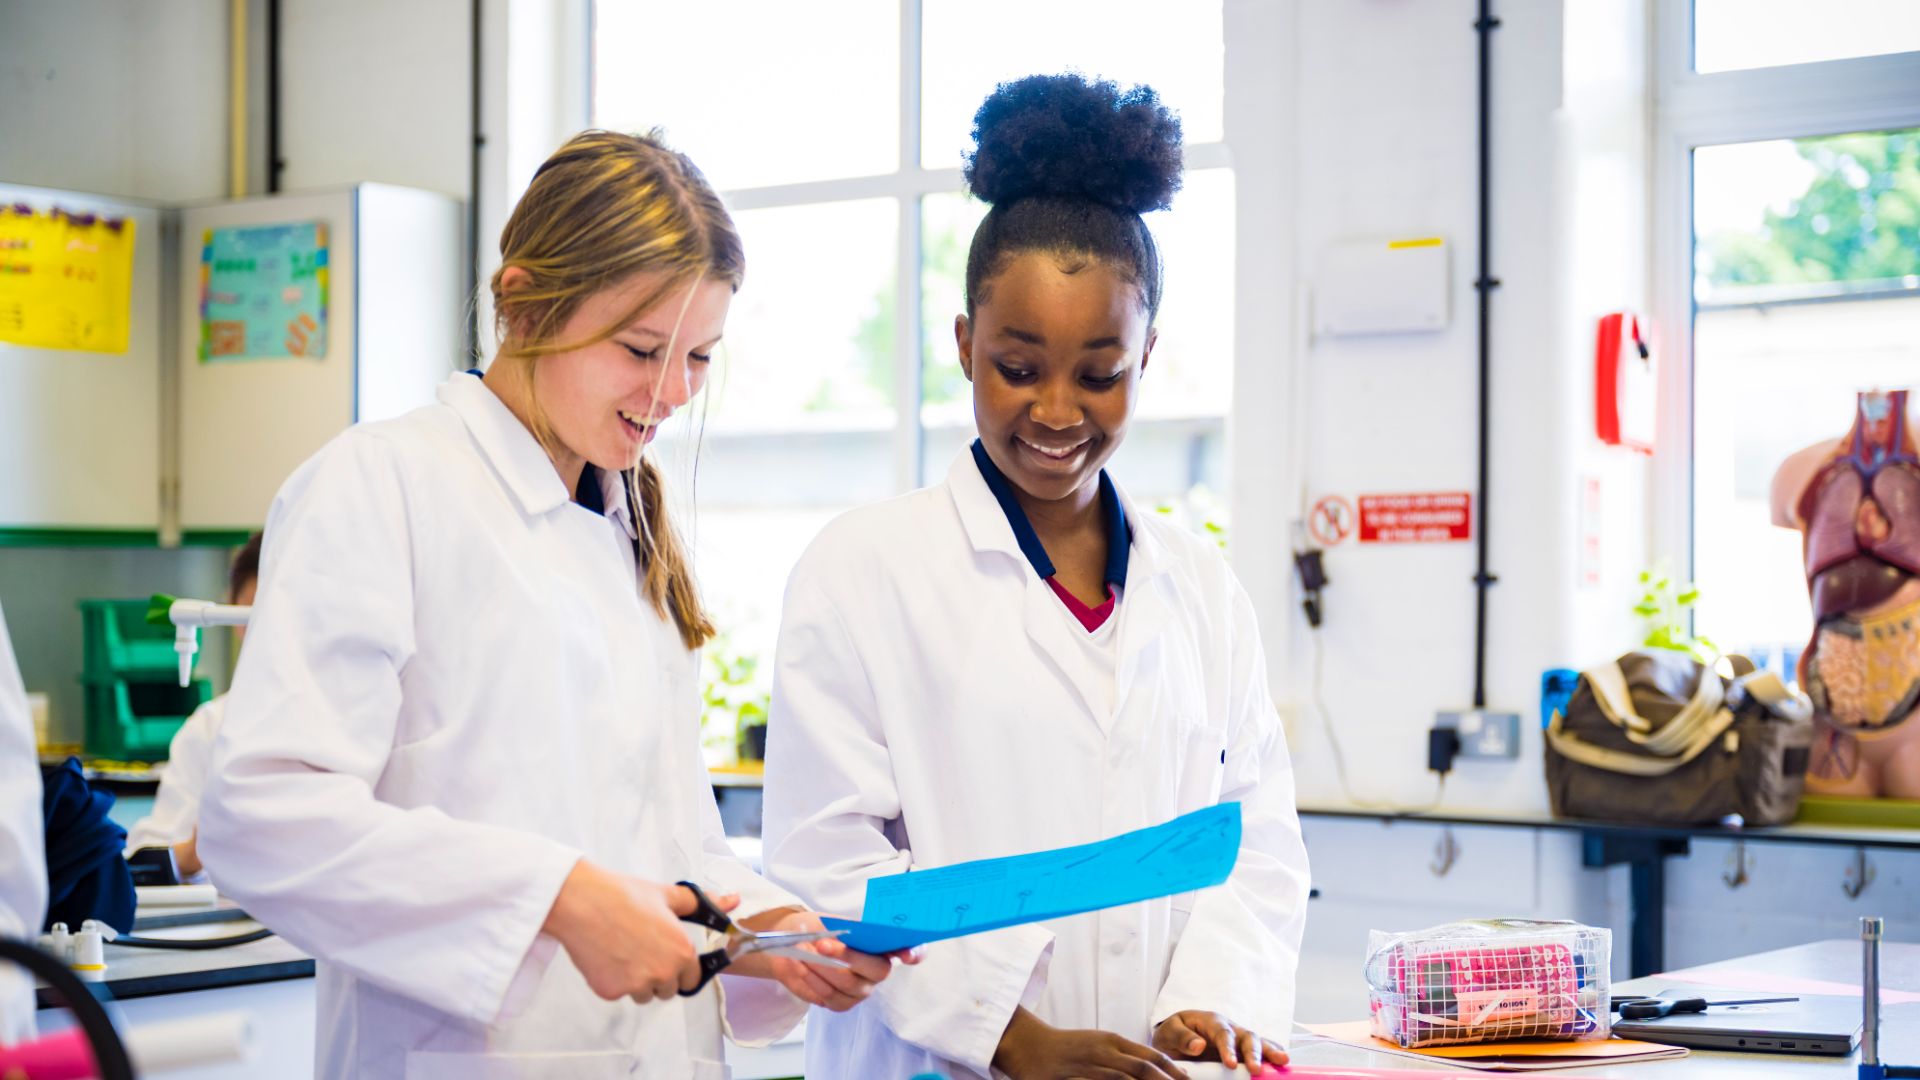 A photo of claires court senior girls in the school lab during a science class